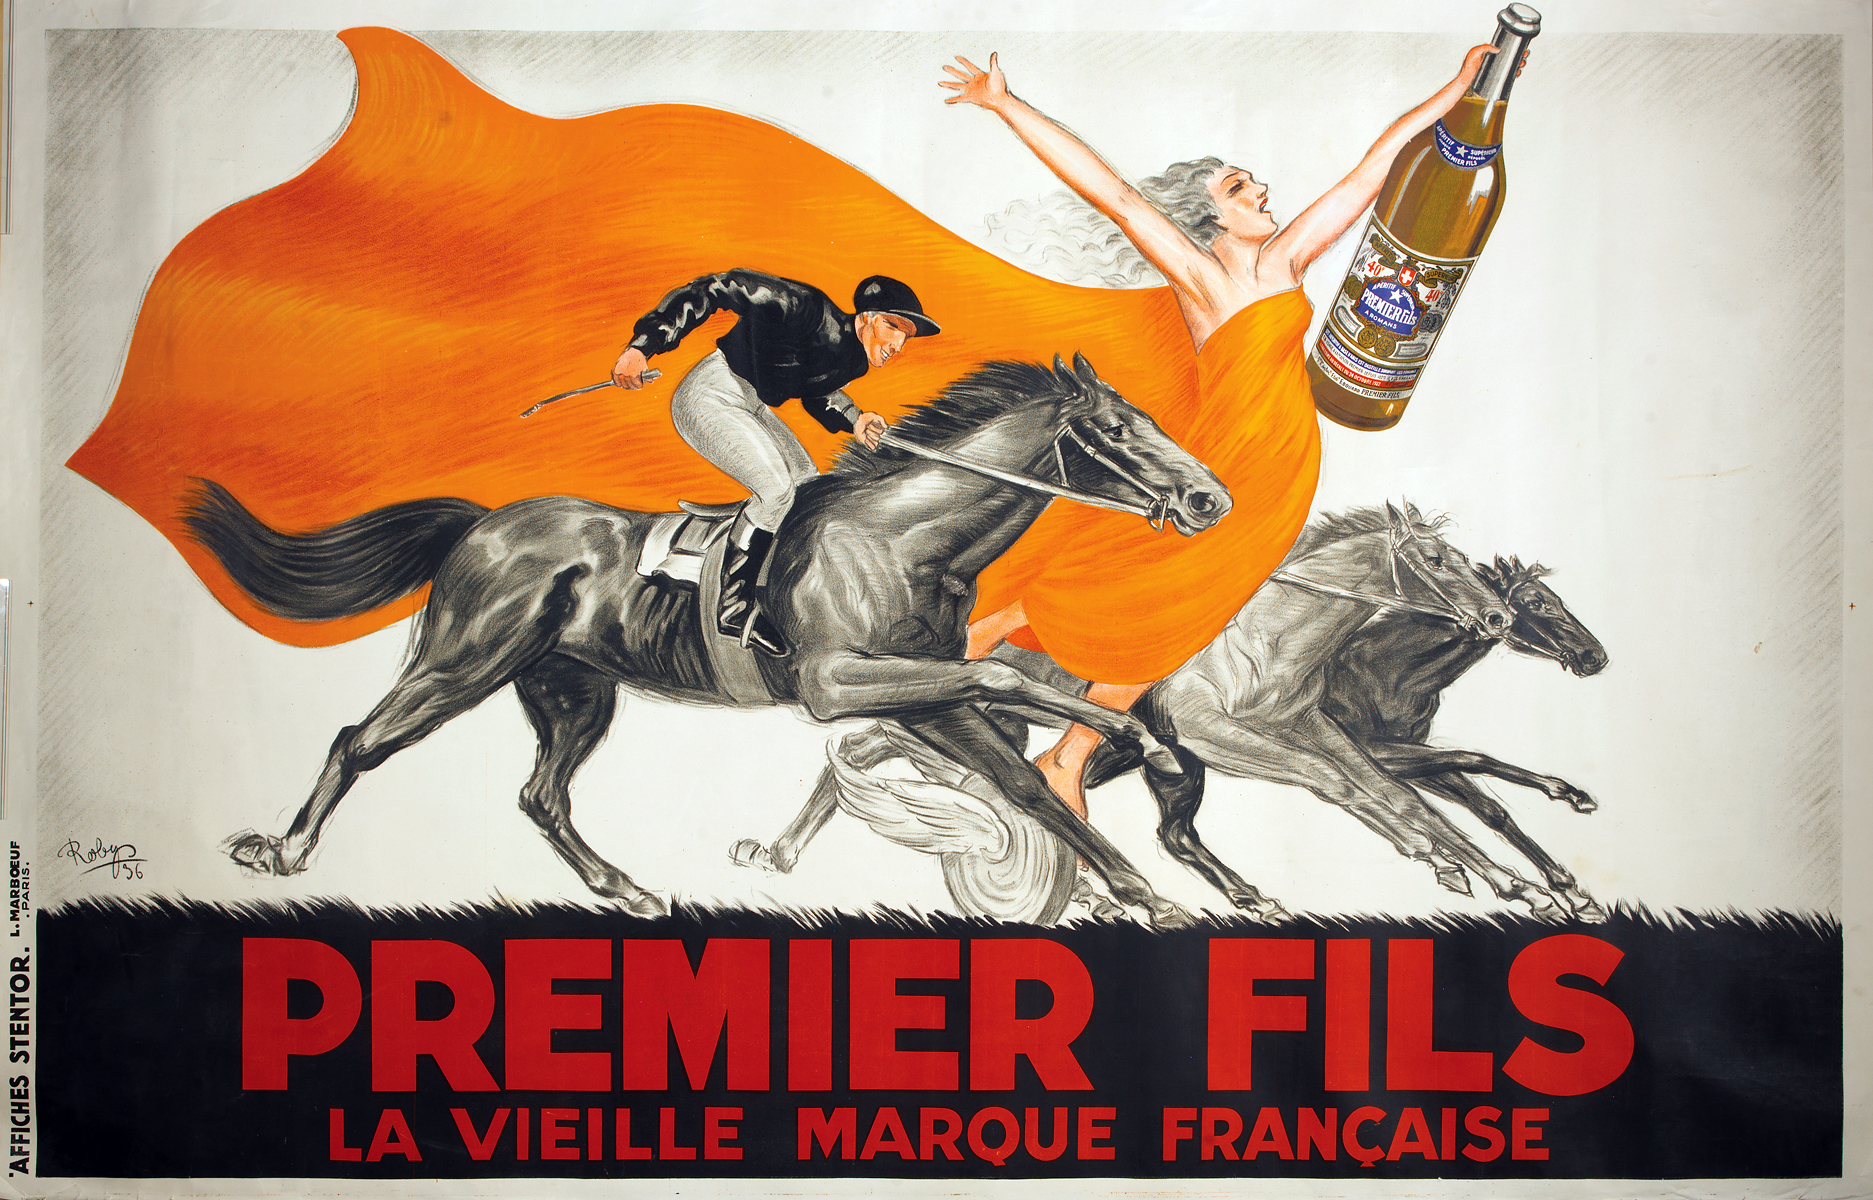 Premier Fils, Beverage Poster (c. 1936) by Robys (Robert Wolff). Park West Gallery Collection.